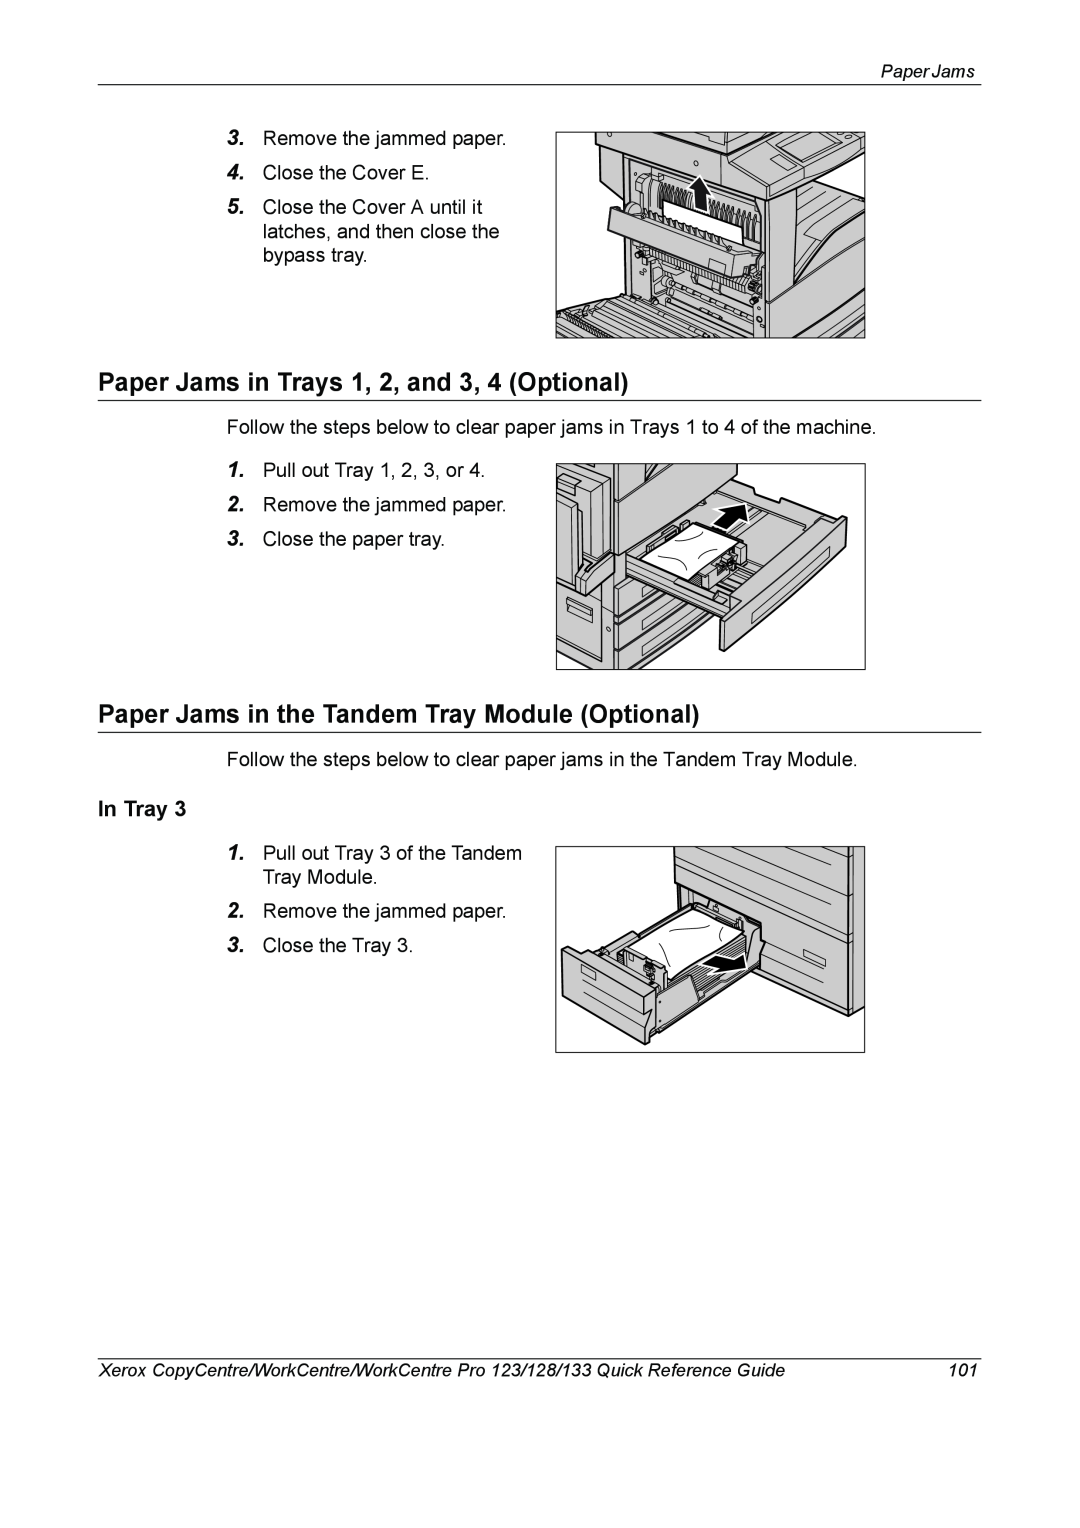 Xerox 604P18037 manual Paper Jams in Trays 1, 2, and 3, 4 Optional, Paper Jams in the Tandem Tray Module Optional, In Tray 